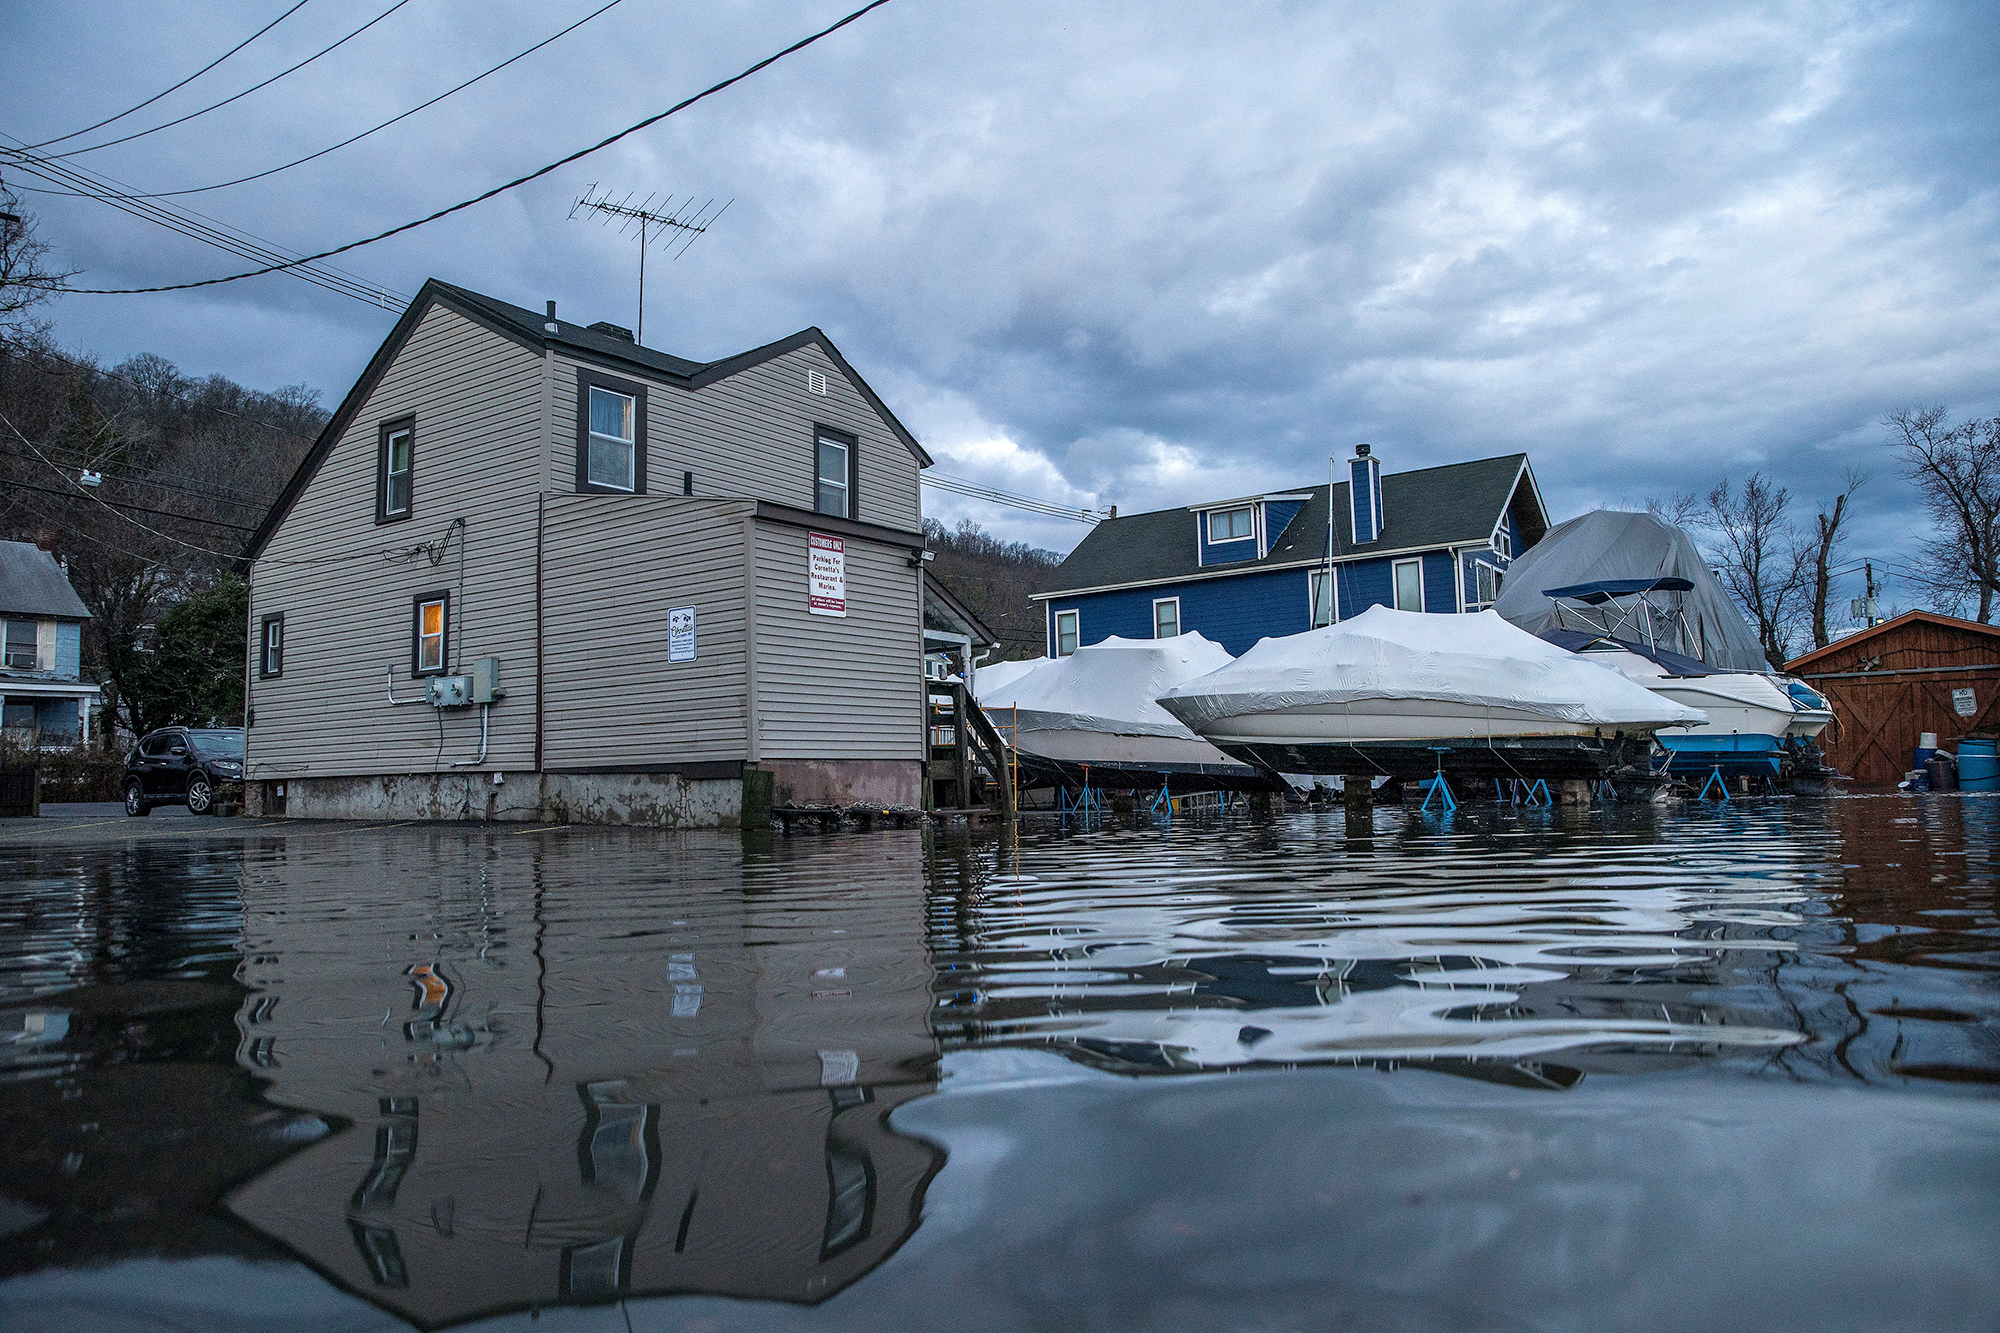 Water rises at a residential area in an aftermath of a storm in Piermont, New York, on January 10.